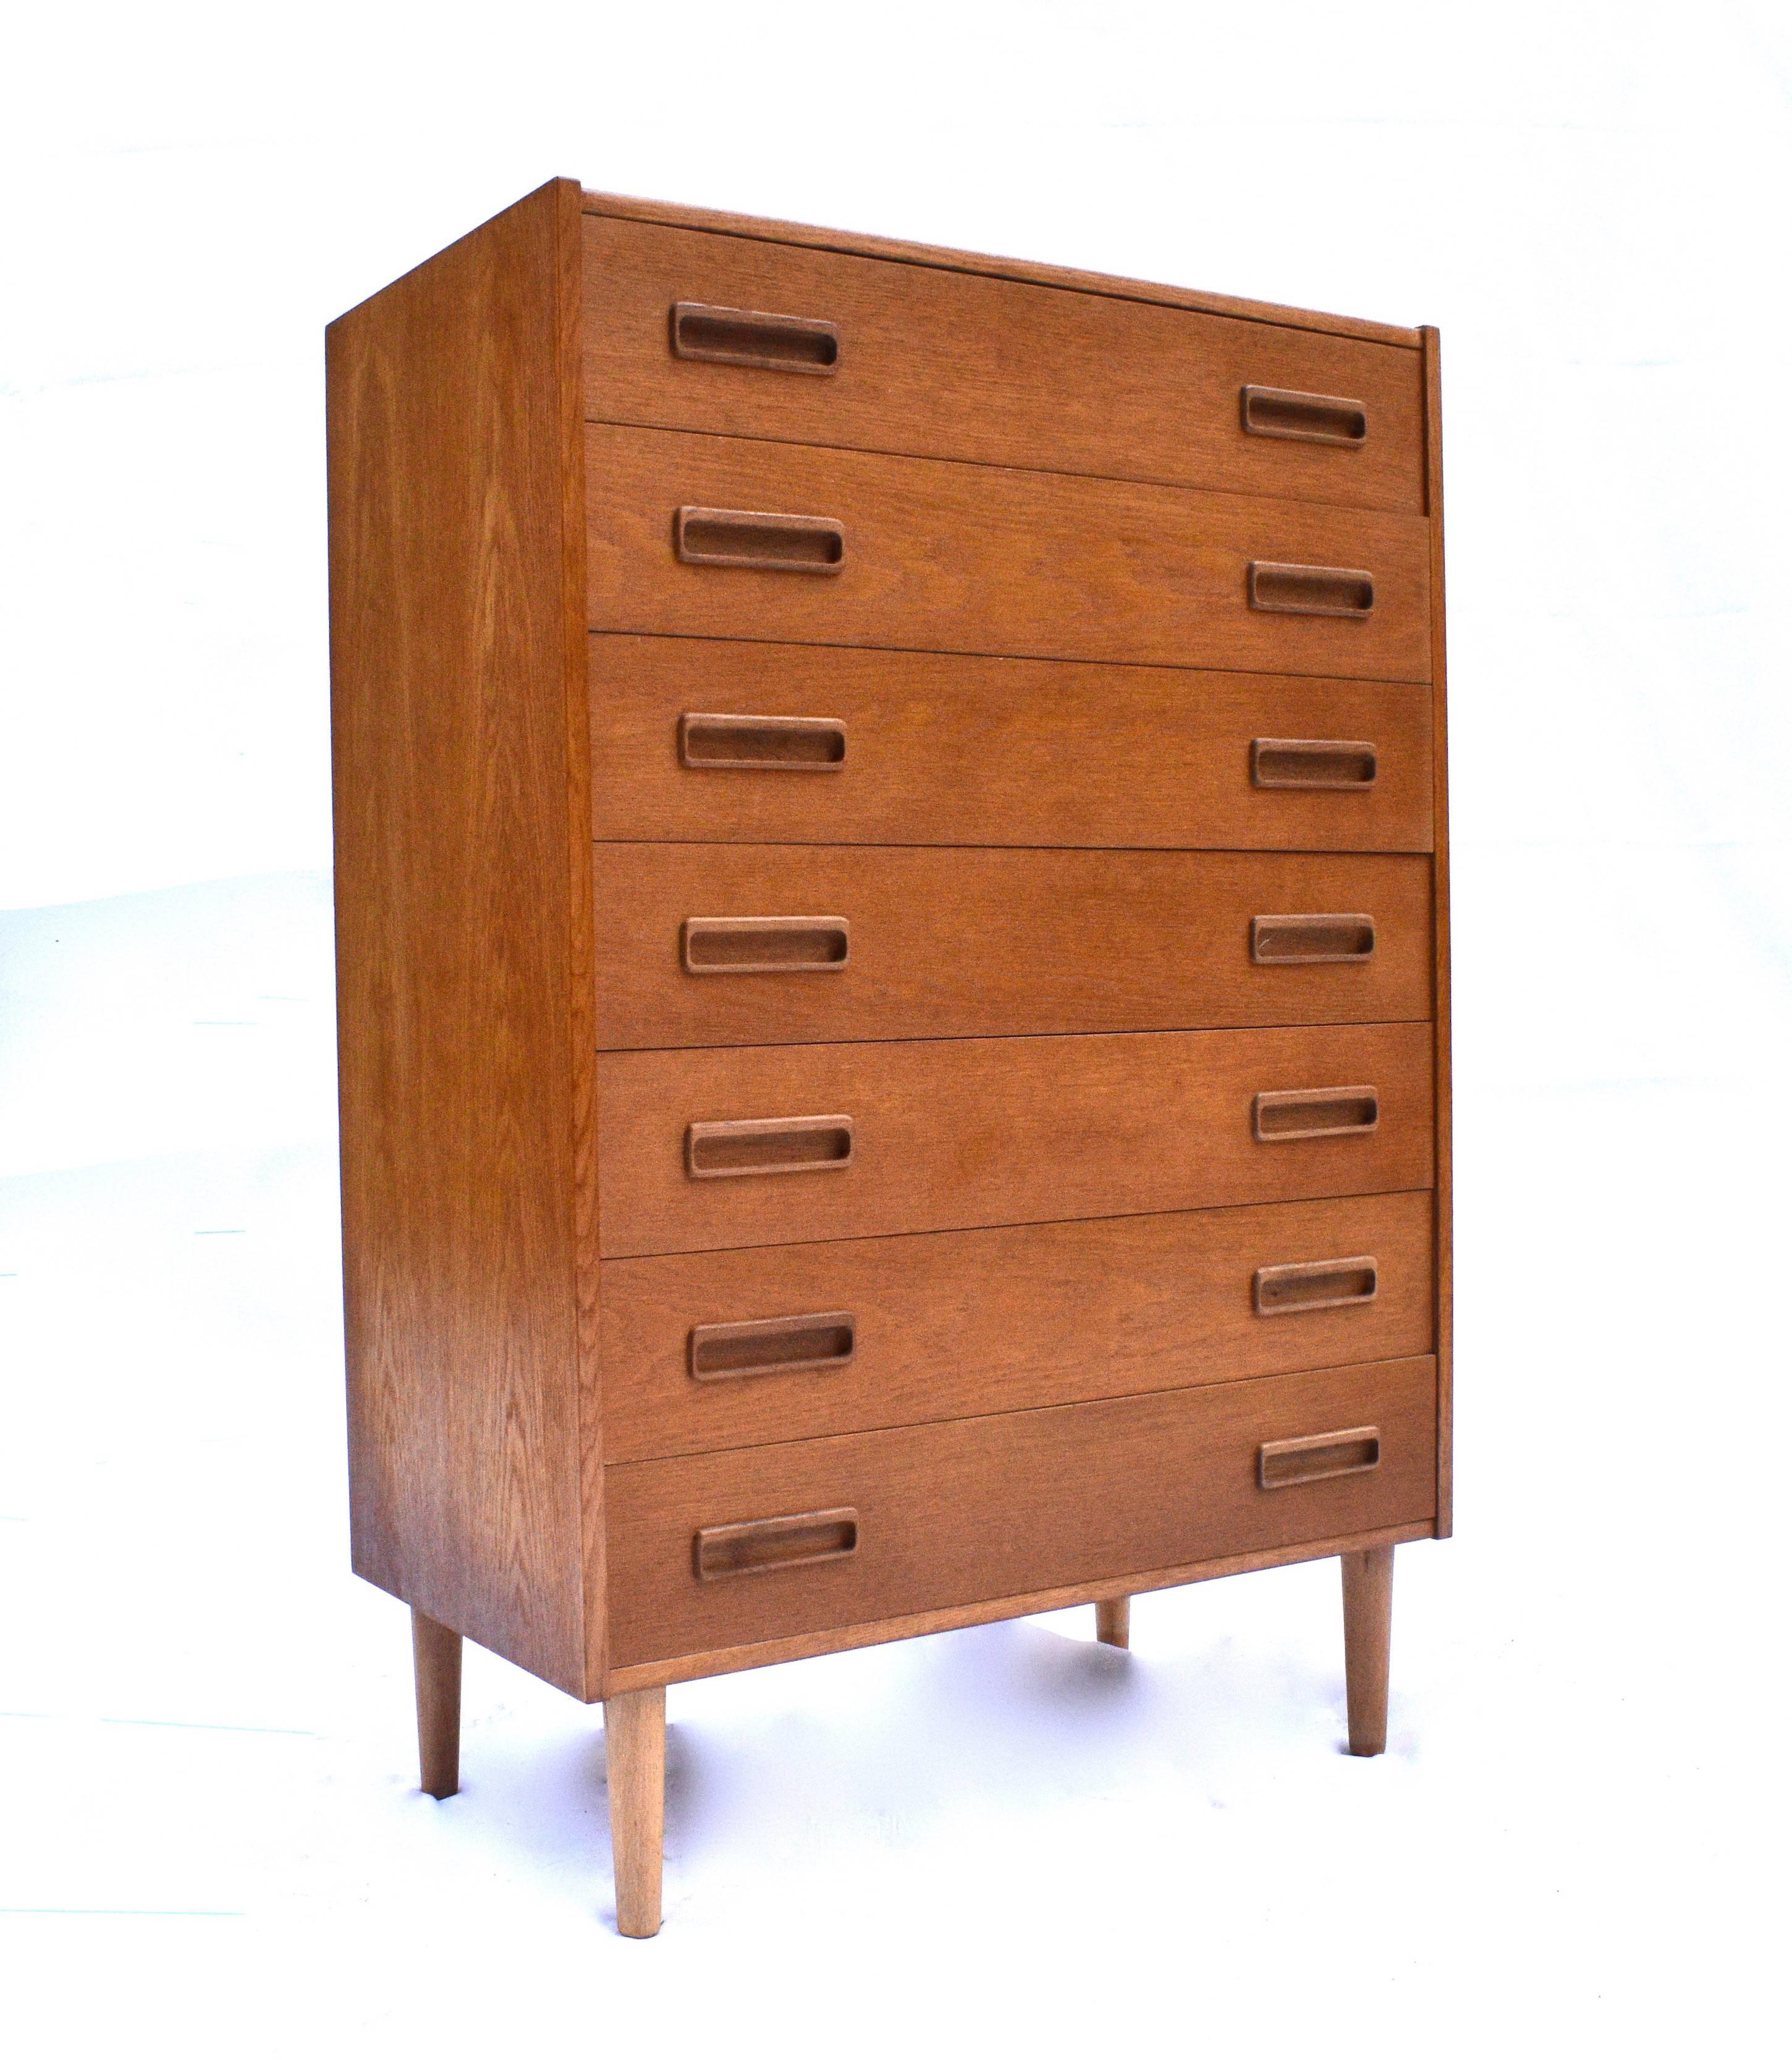 A beautiful Danish light oak tallboy chest of drawers, this would make a stylish addition to any bedroom area. 

The chest has seven drawers, all are in good working order with sculptured wooden handles and dovetail joins.

 A striking piece of